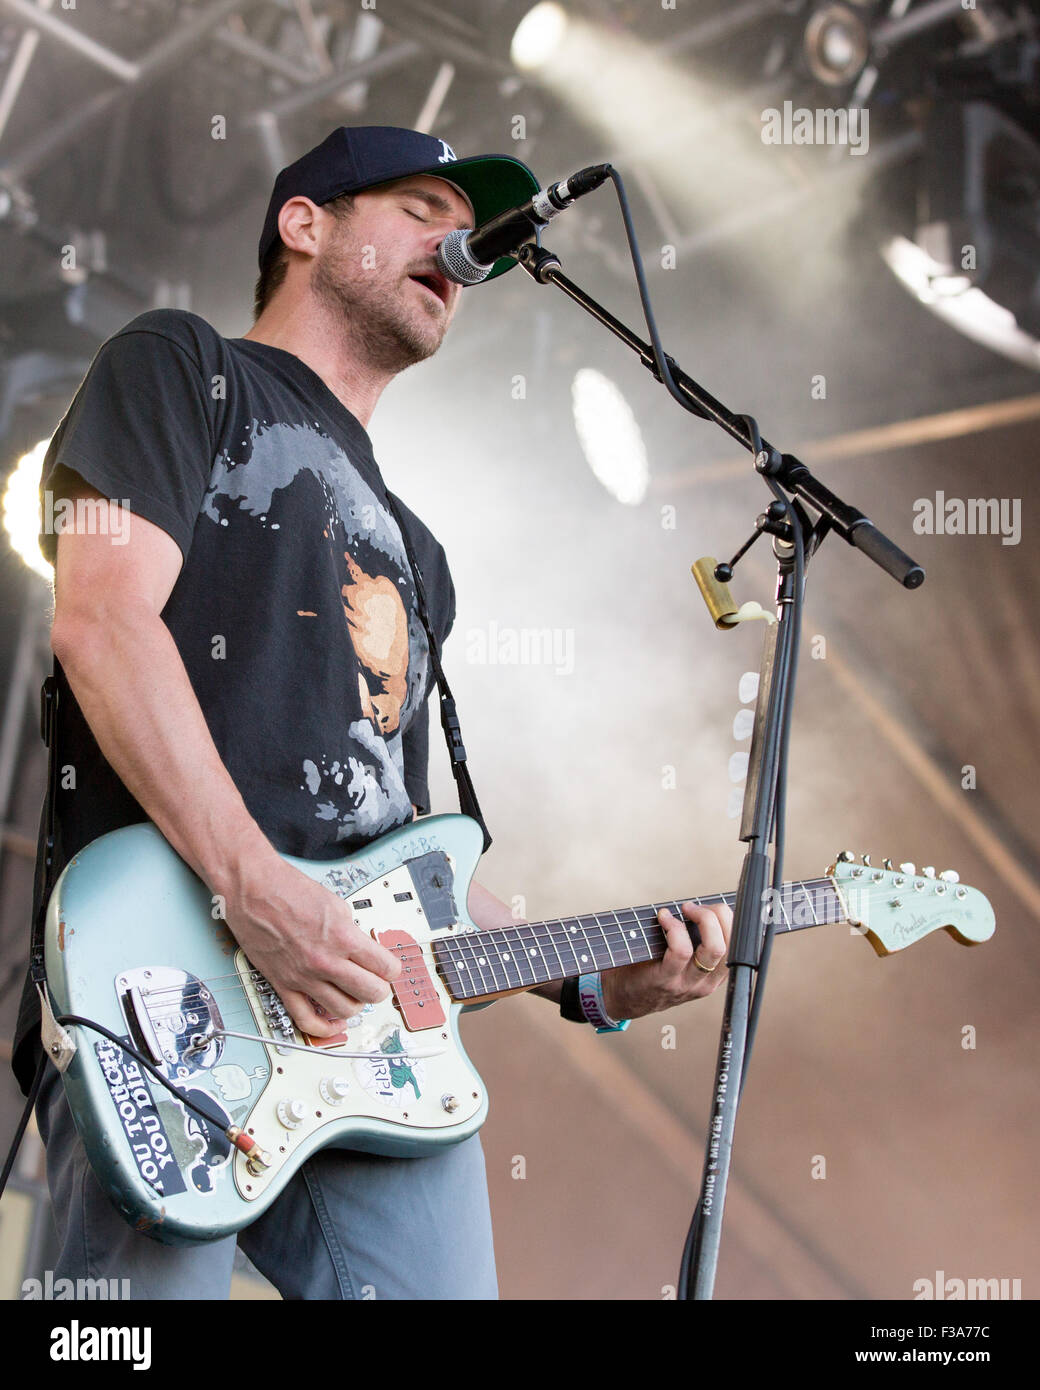 https://c8.alamy.com/comp/F3A77C/austin-texas-usa-2nd-oct-2015-singer-and-guitarist-jesse-lacey-of-F3A77C.jpg